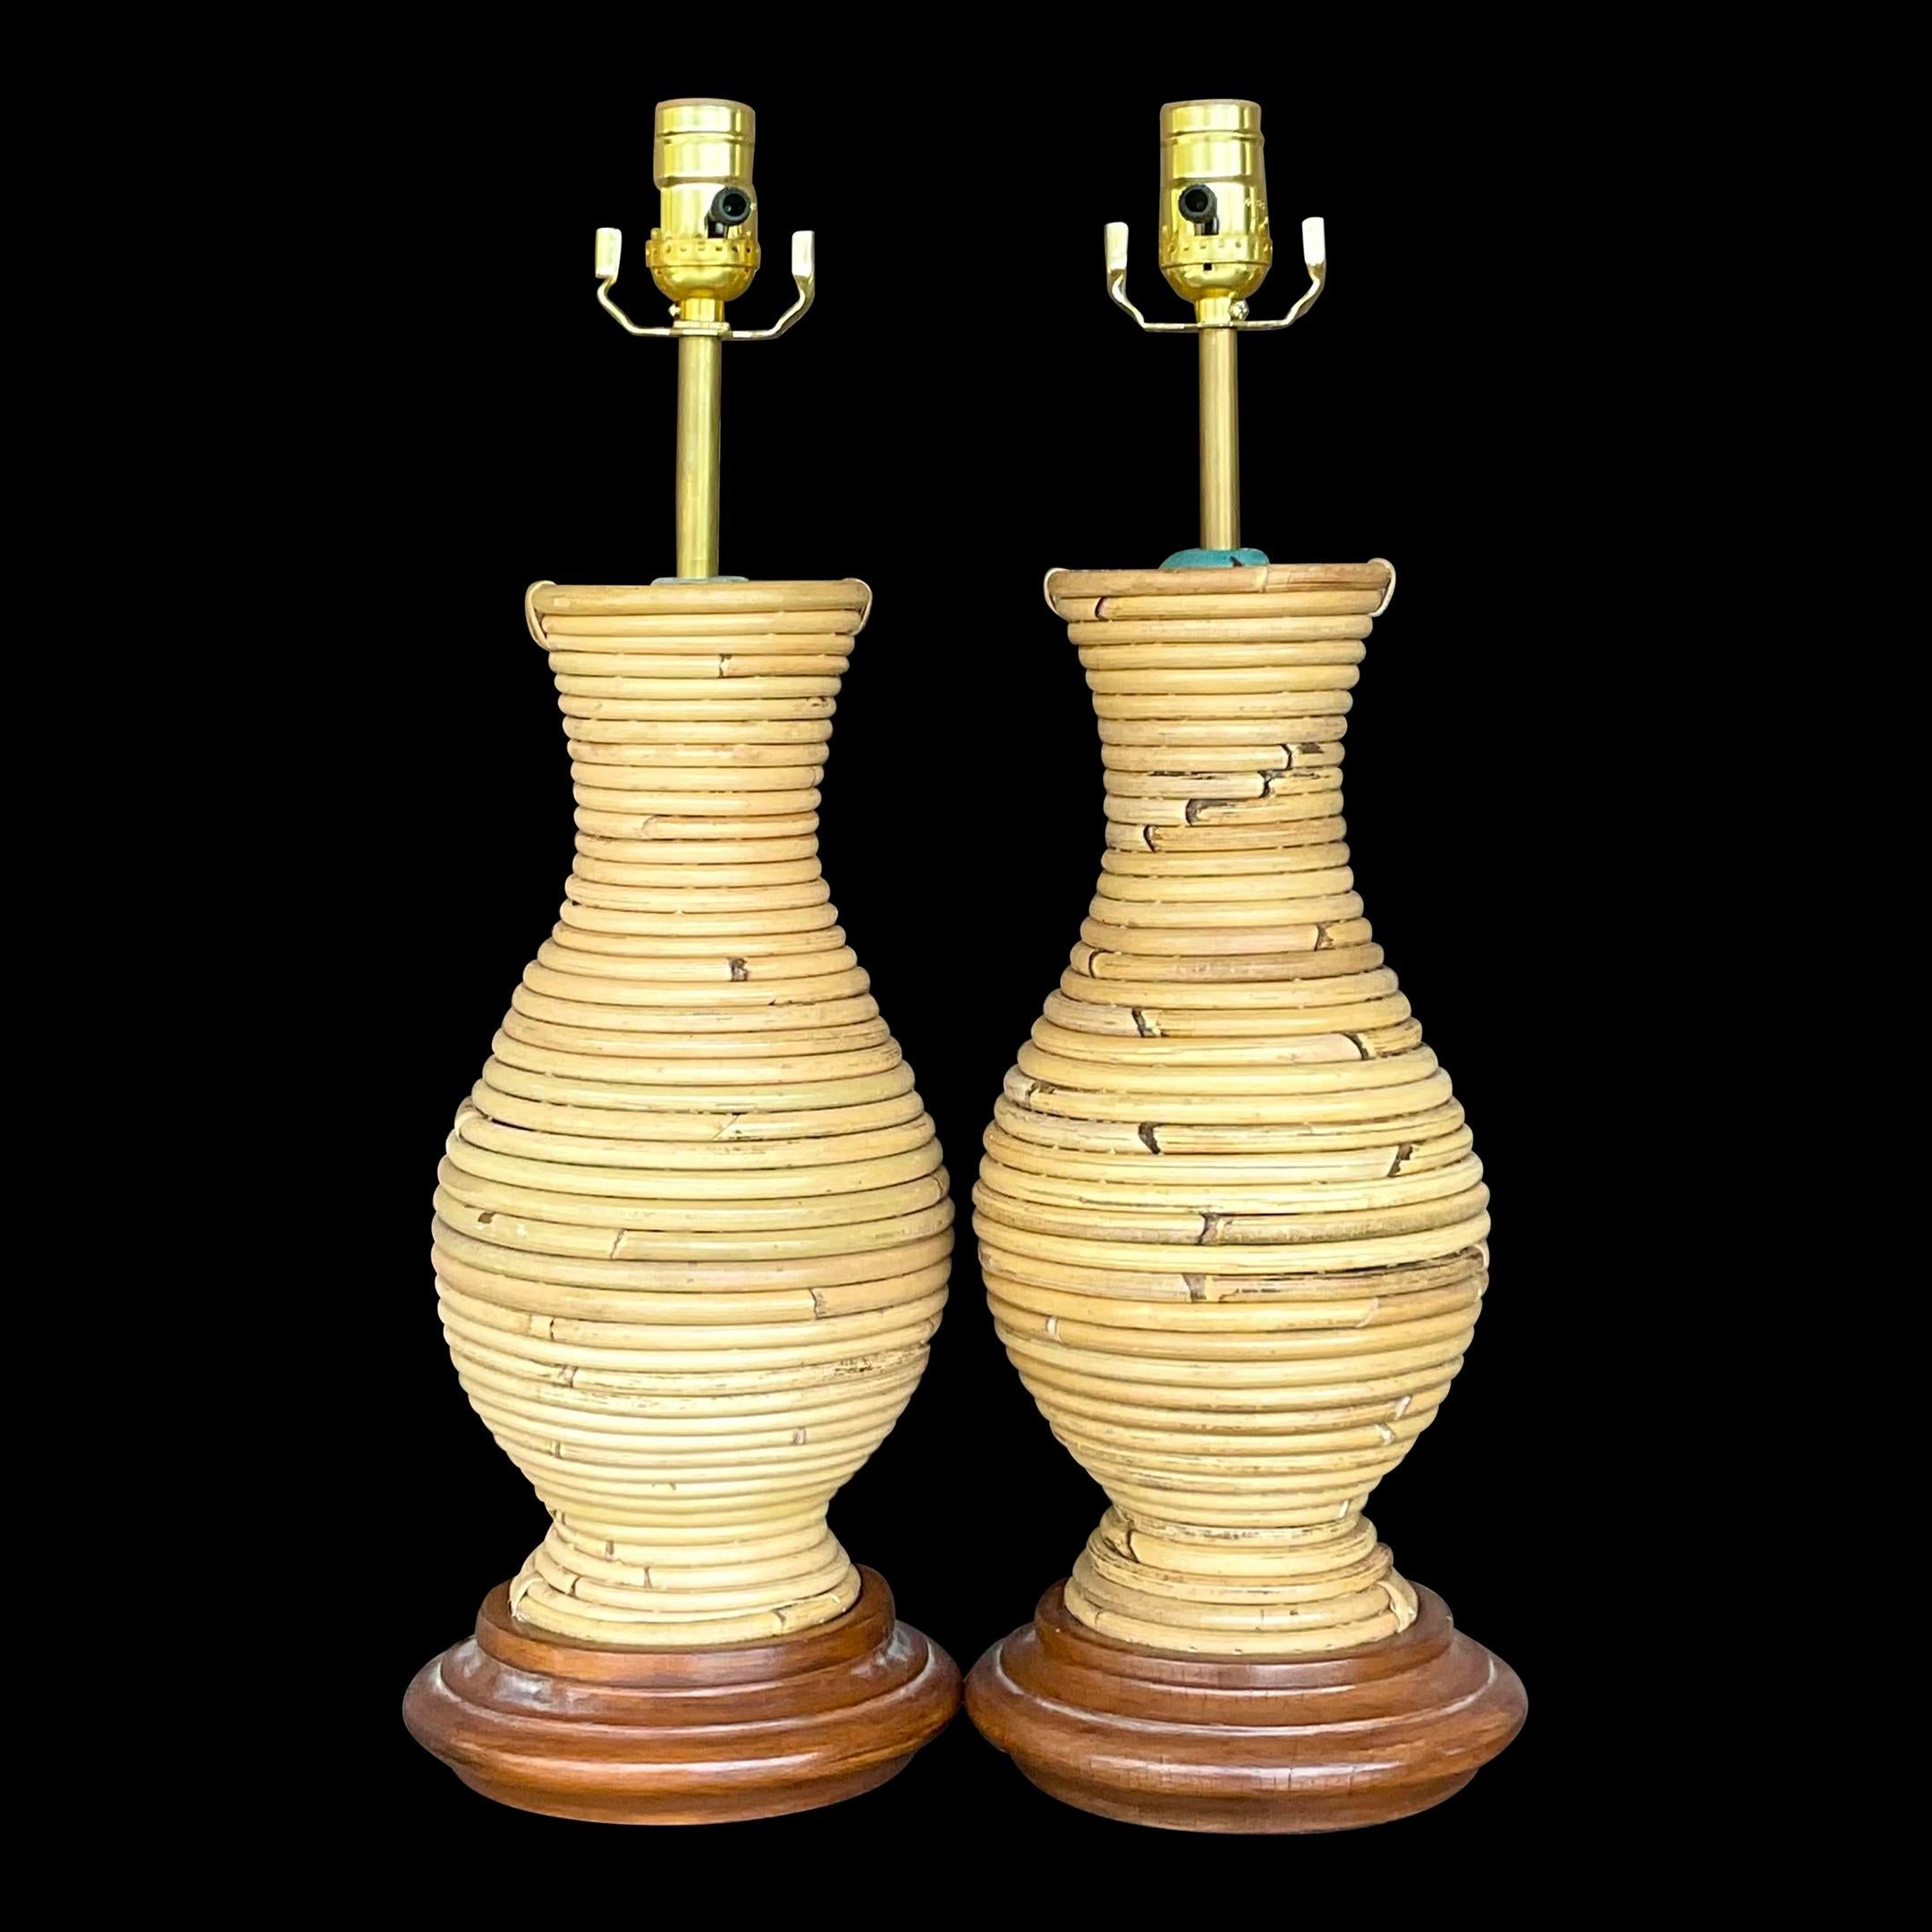 Metal Vintage Coastal Coiled Pencil Reed Lamps - a Pair For Sale